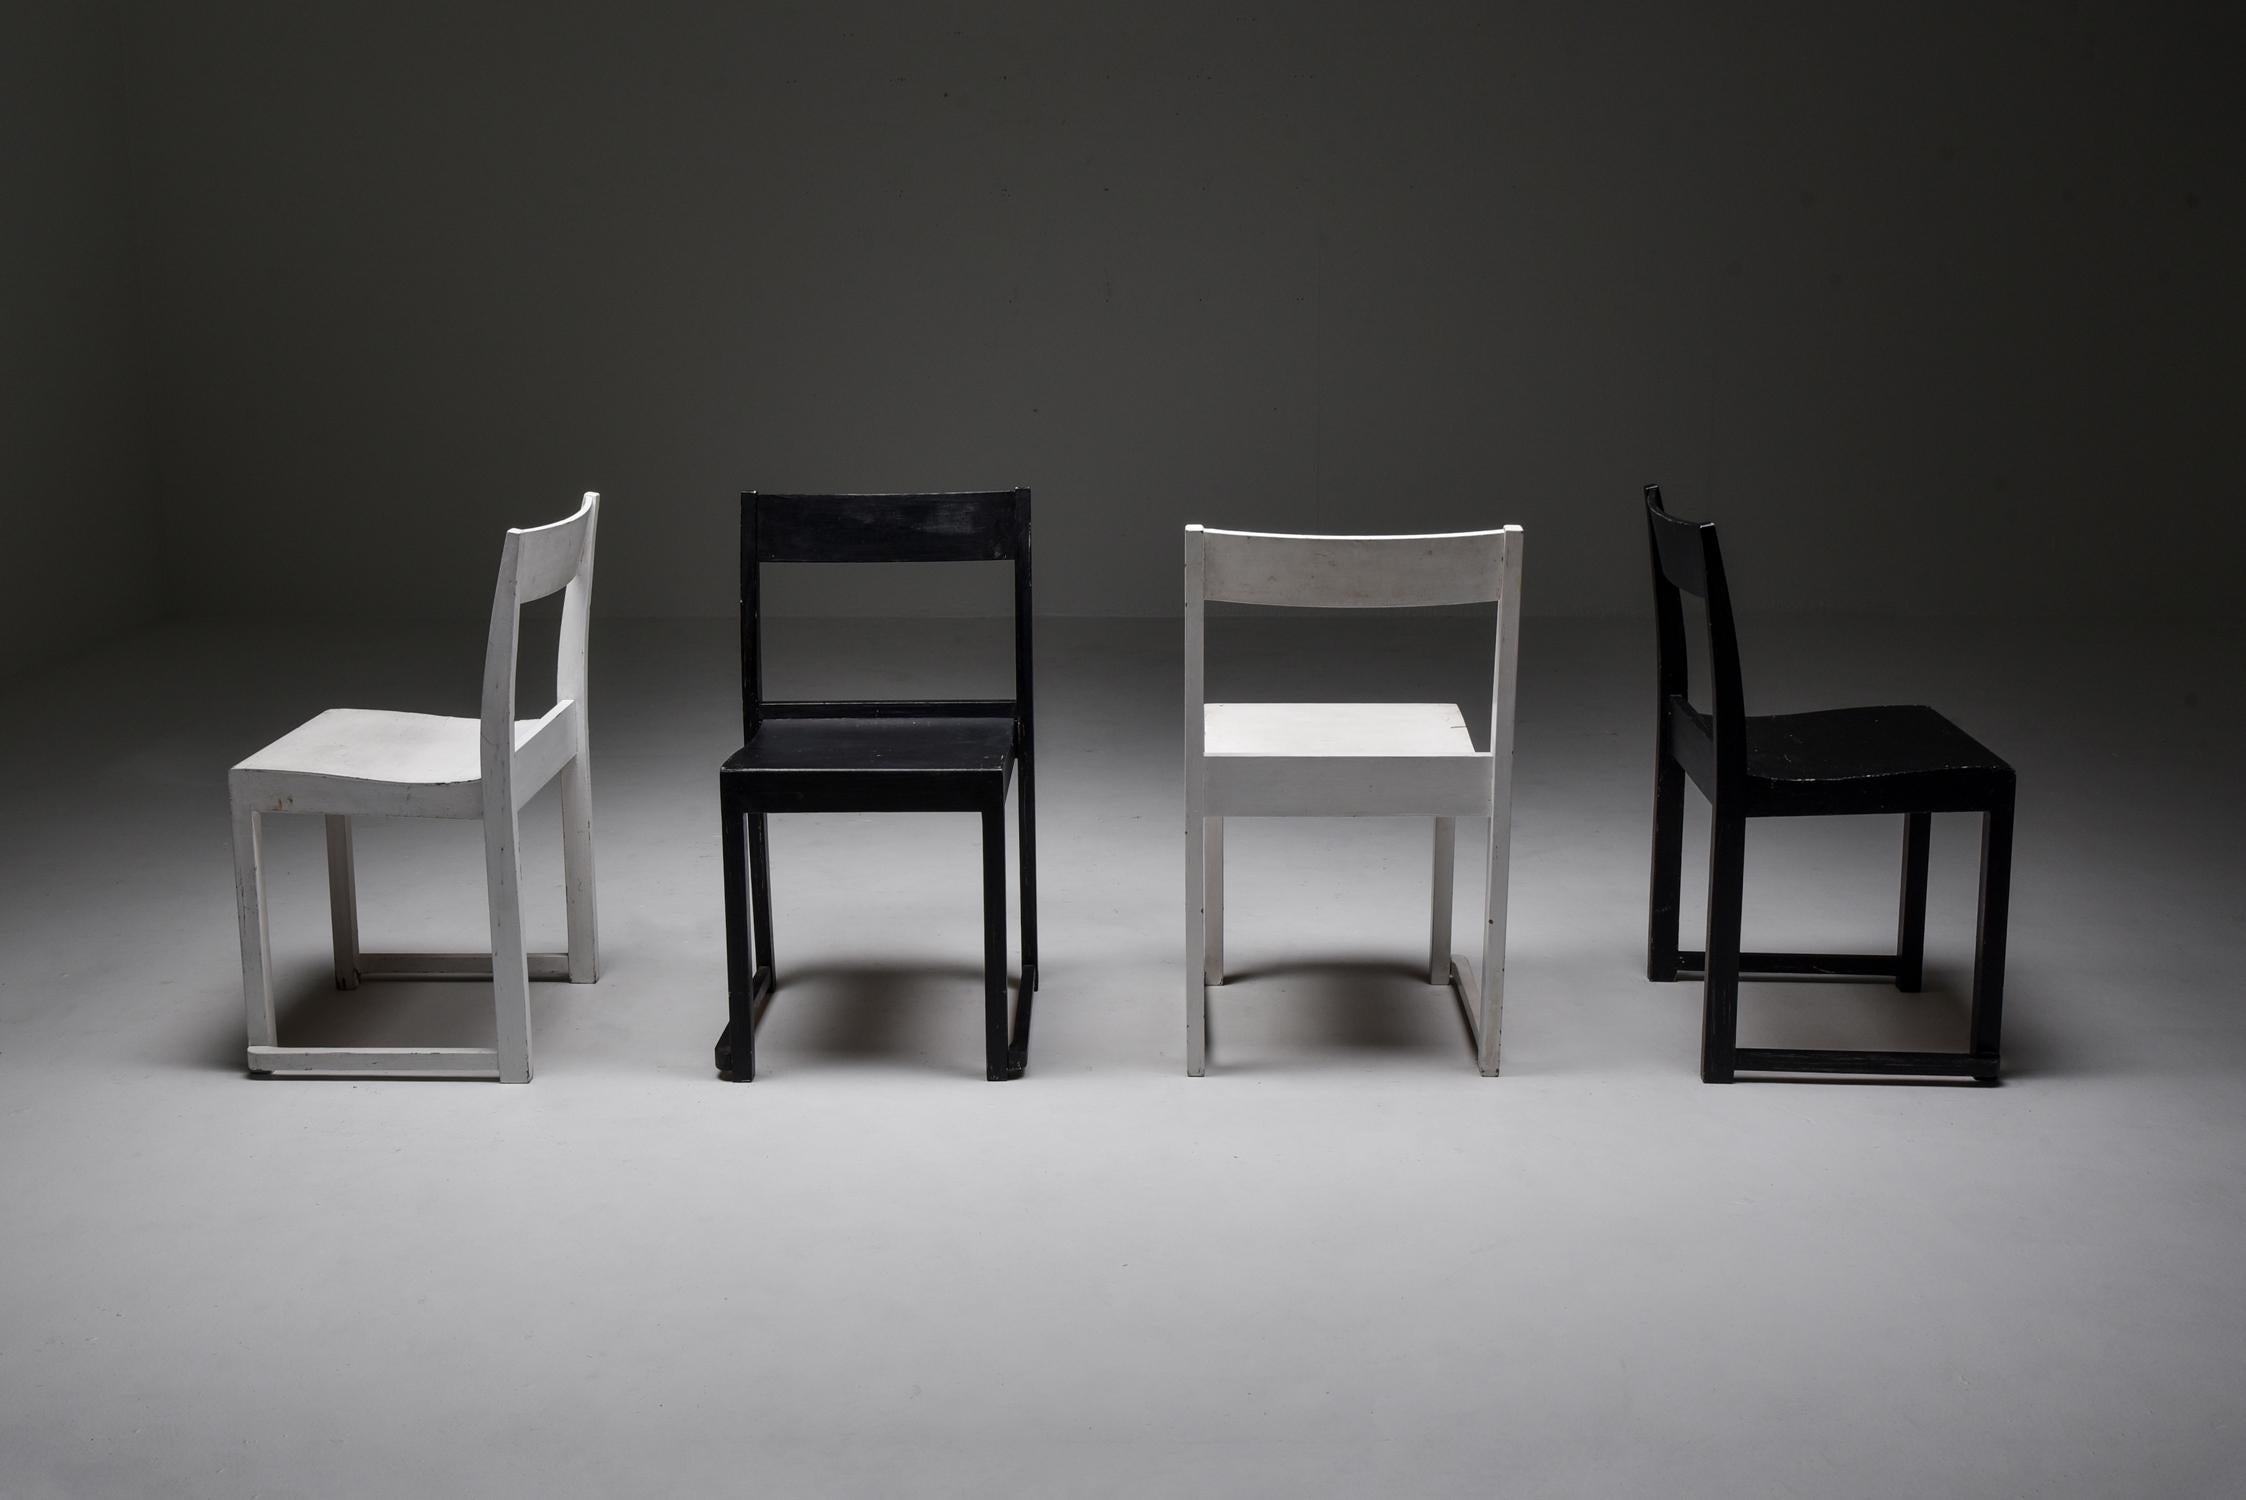 Scandinavian modern, lacquered birch, stackable 'orchestra' chairs, Sven Markelius, Sweden, 1930s.

These modernist chairs were especially designed for the Helsingborg Concert Hall.
Clean and simple lines make these very early modernist chairs a